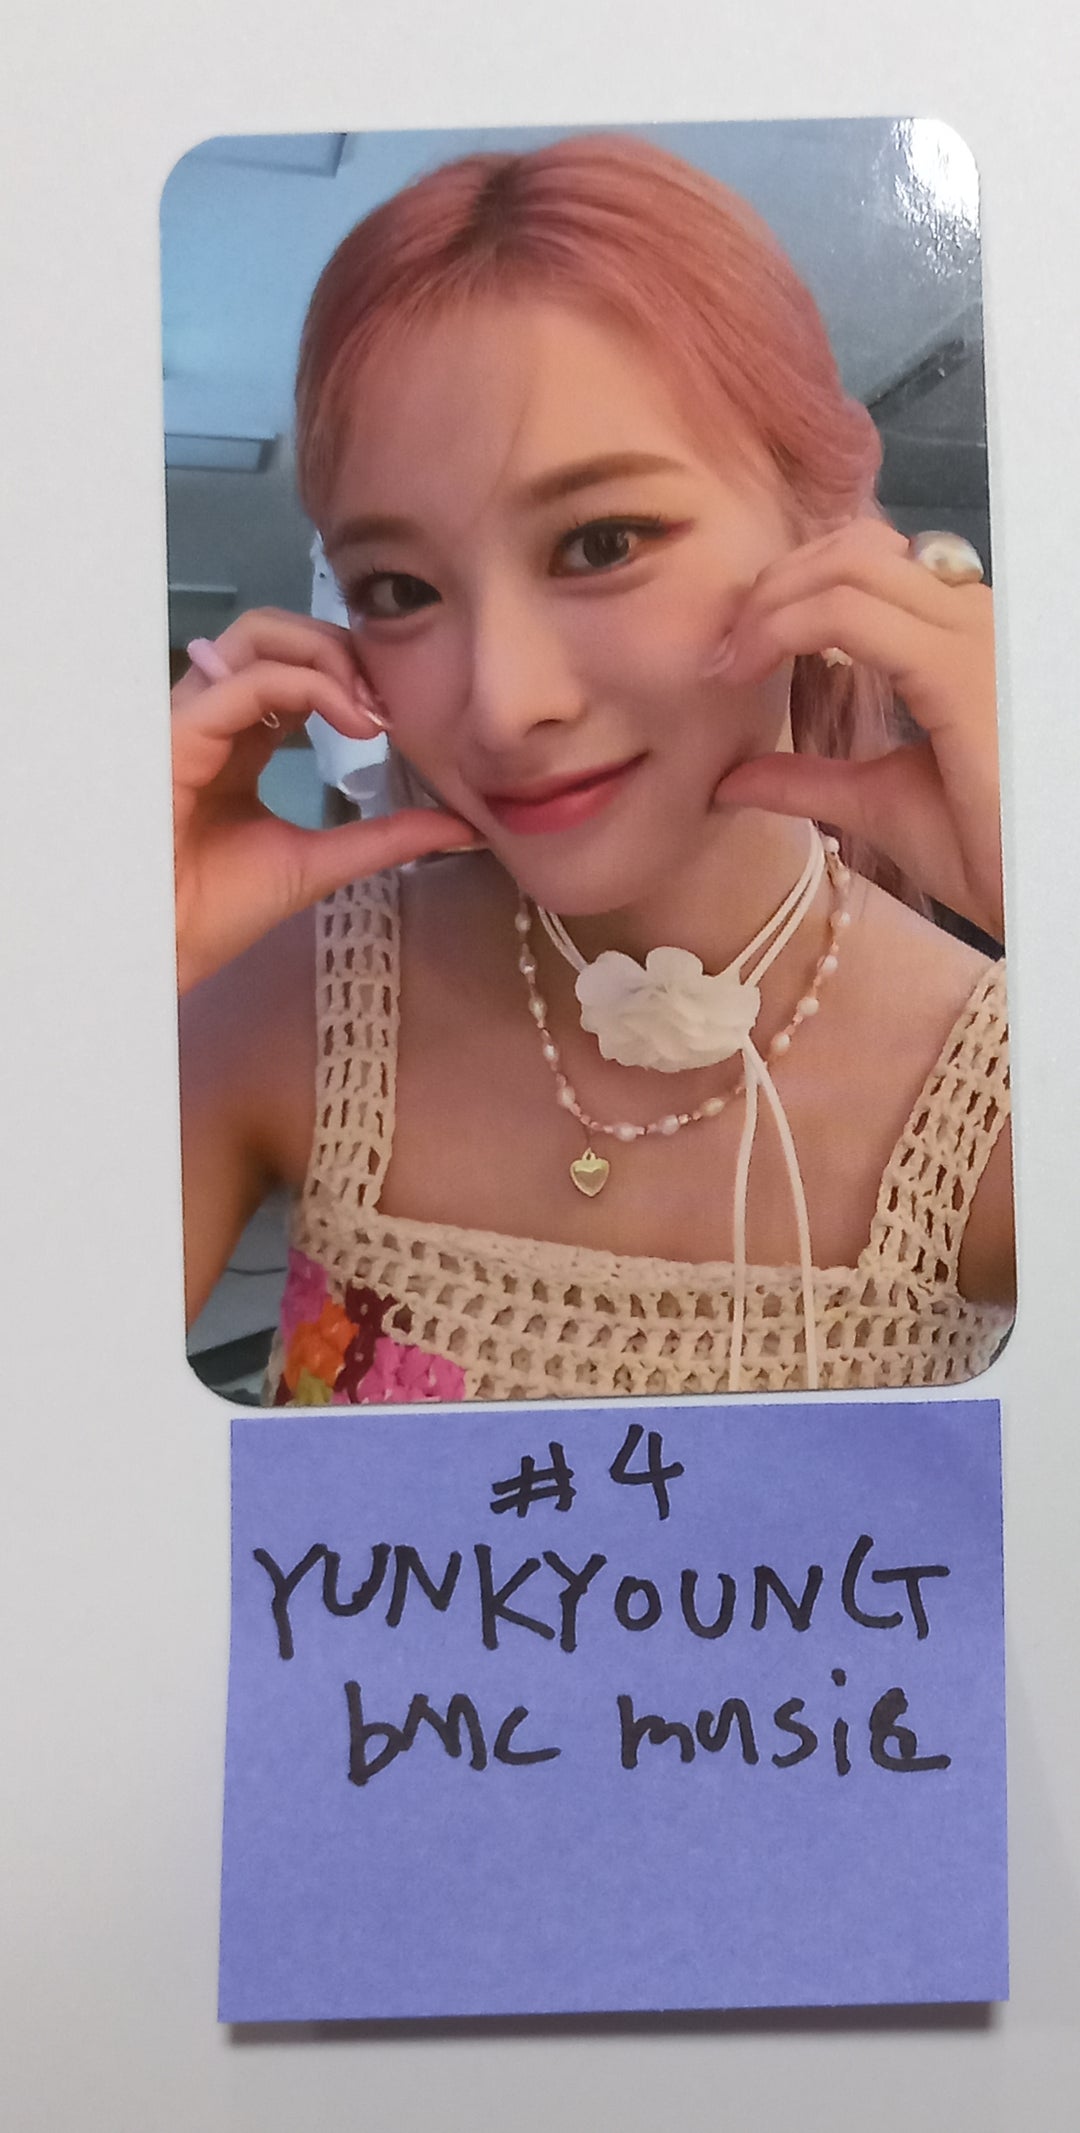 Rocket Punch 'Boom' - DMC Music Fansign Event Photocard [23.10.20]